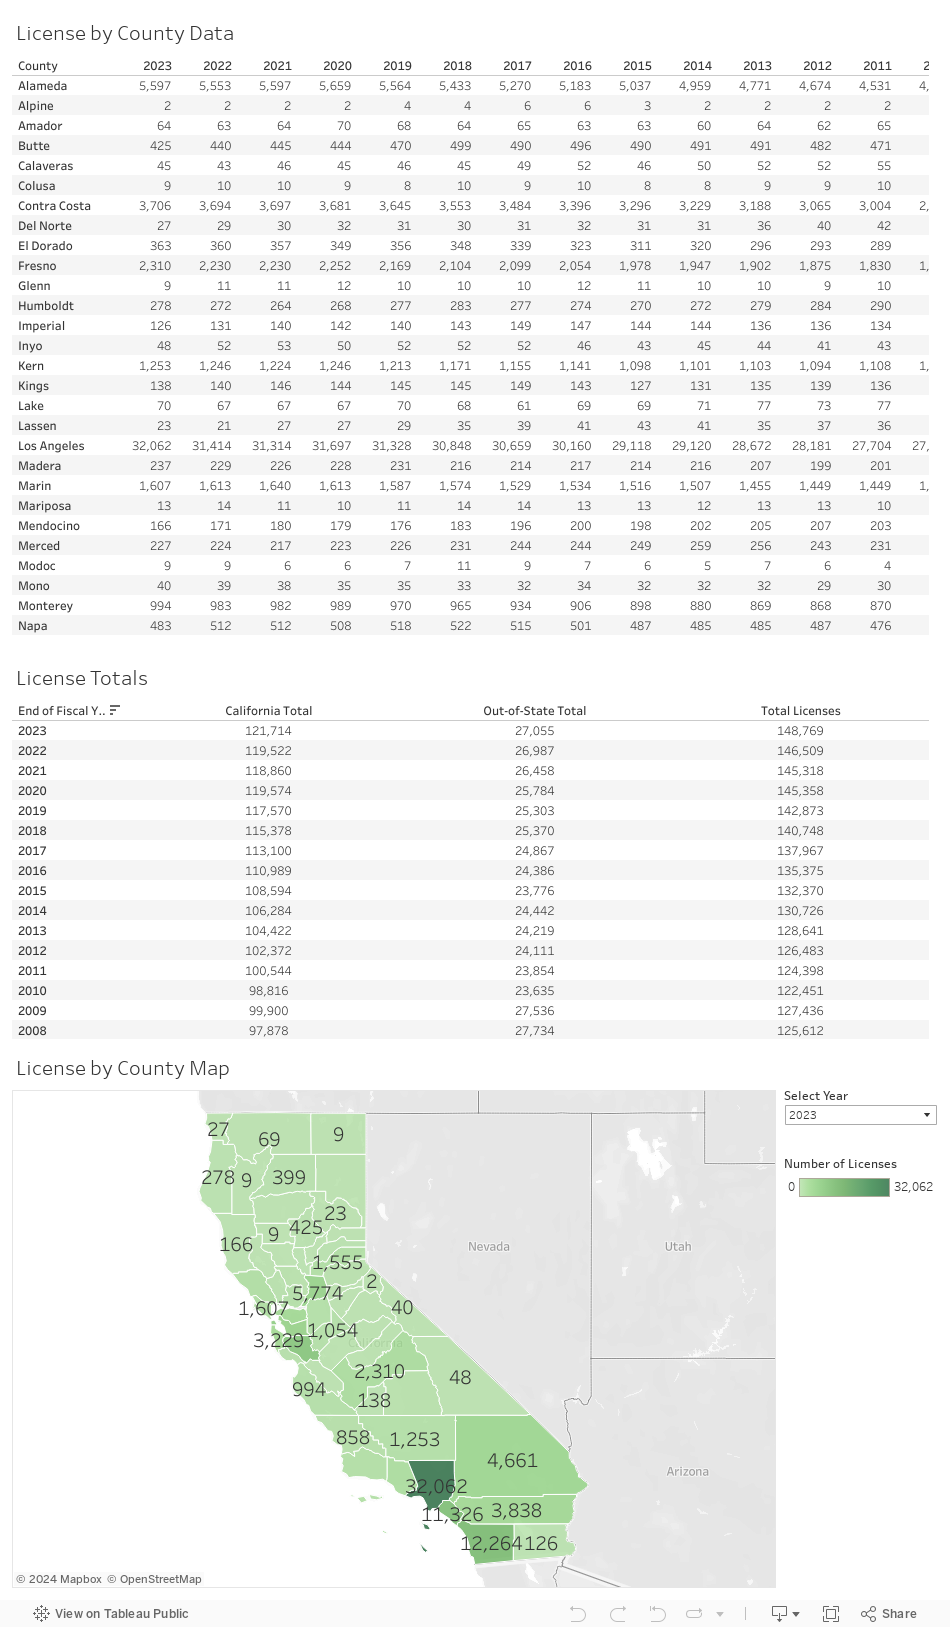 License by county data